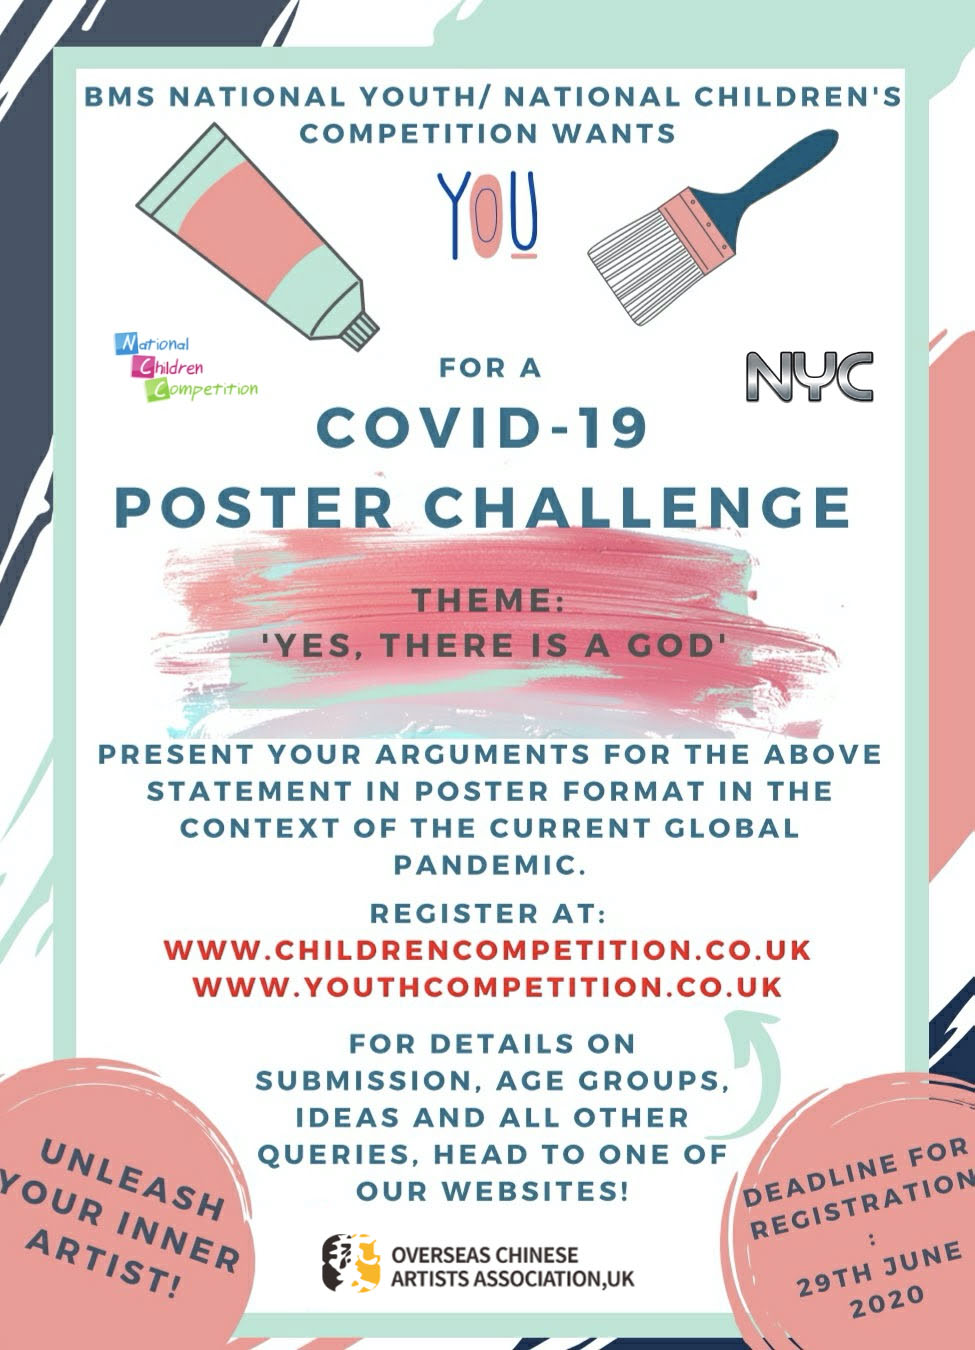 2020 LDE London Design Exchange Competition (COVID-19 POSTER CHALLENGE)